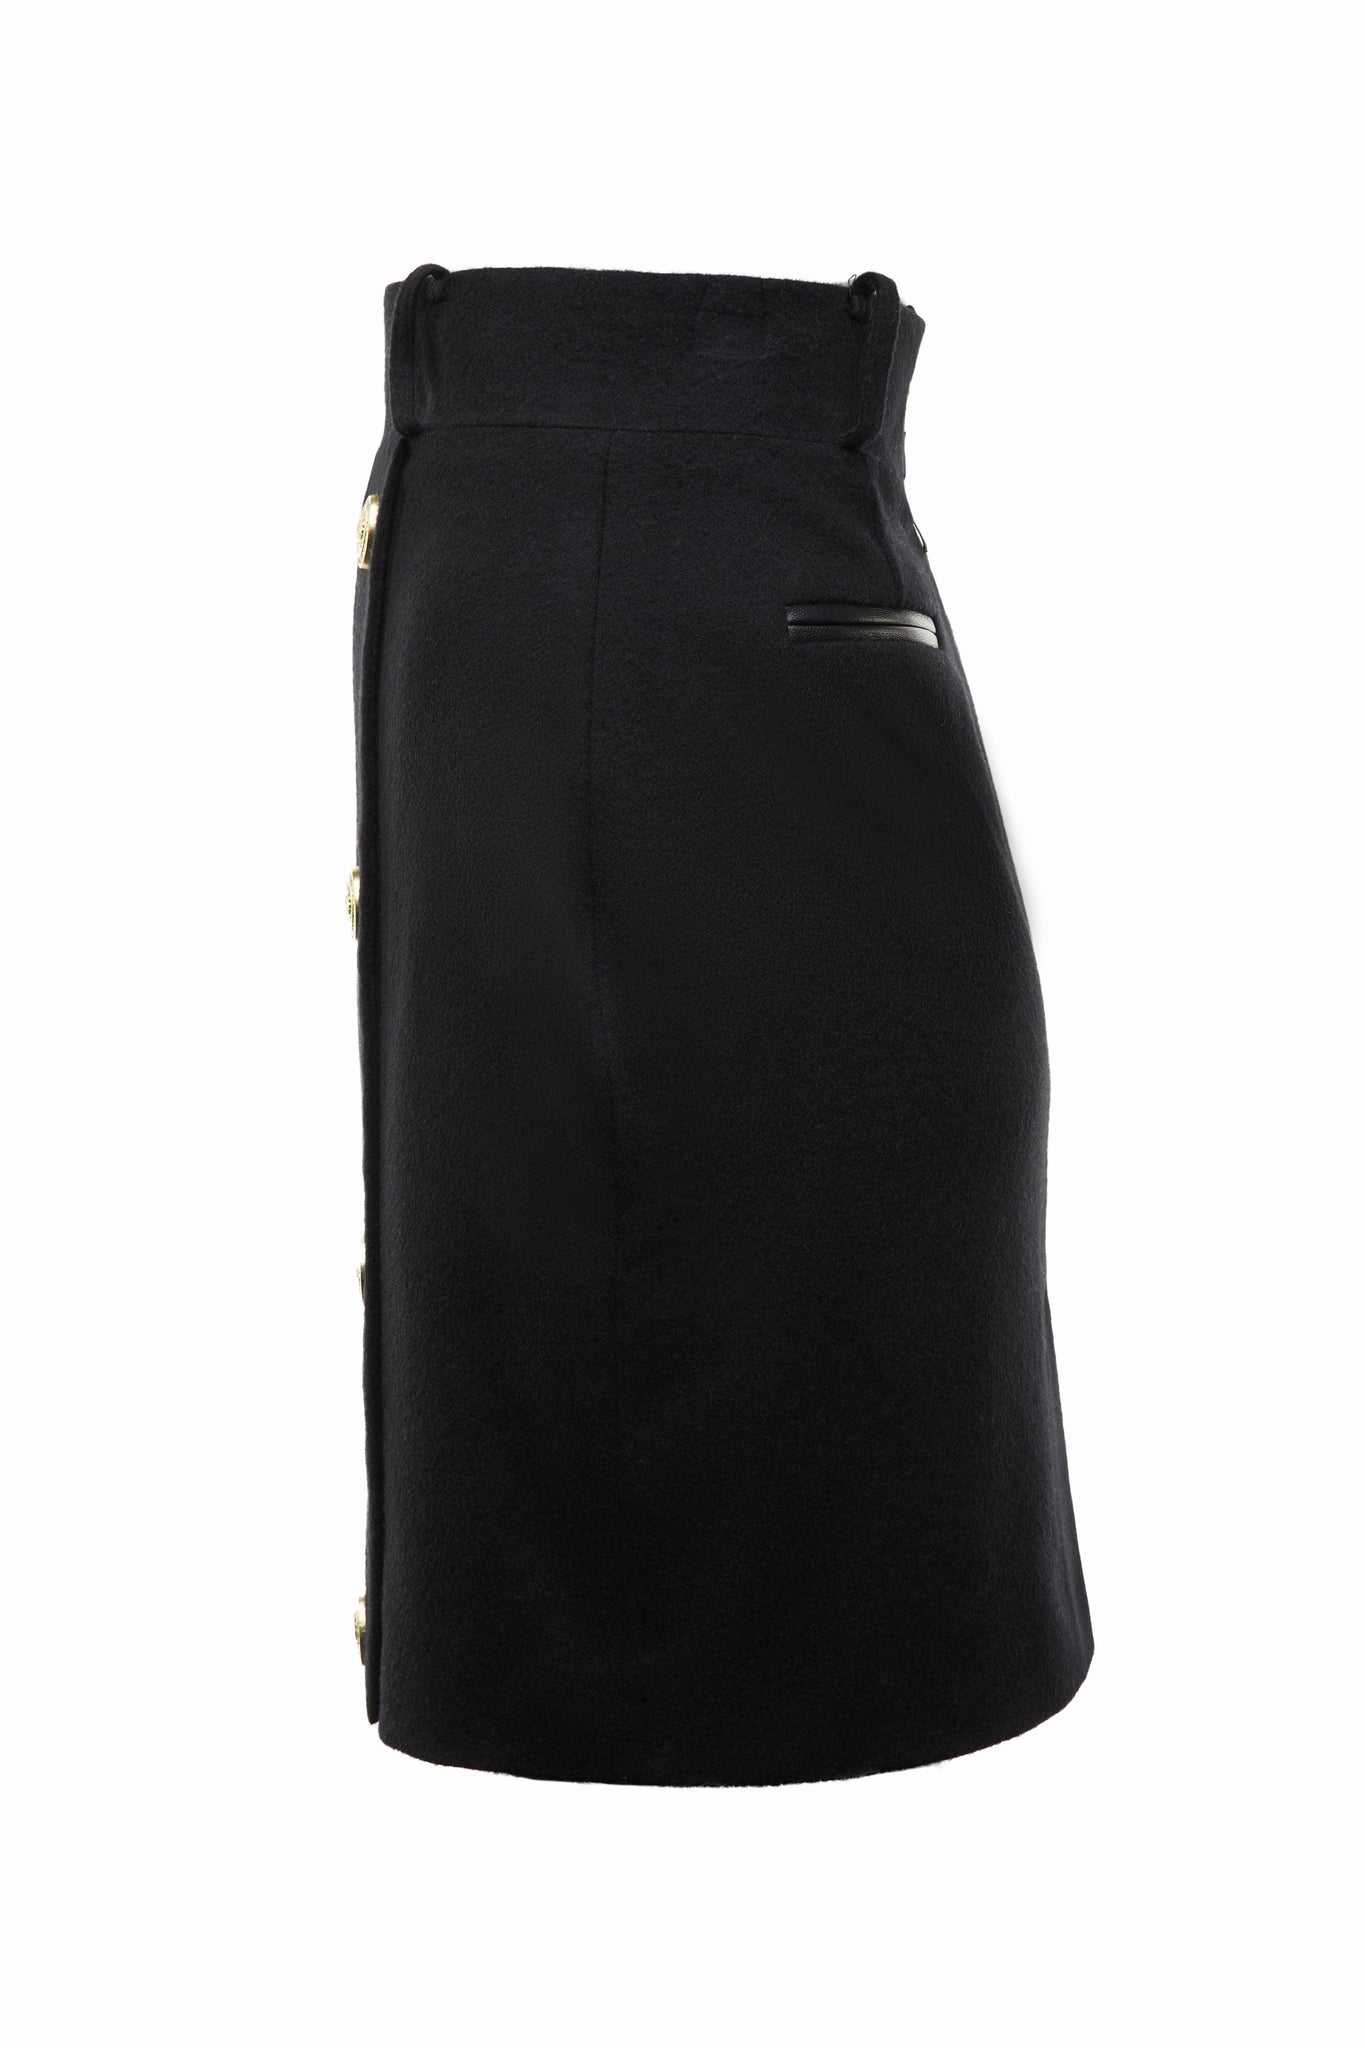 side of womens black wool pencil mini skirt with concealed zip fastening on centre back and gold rivets down front